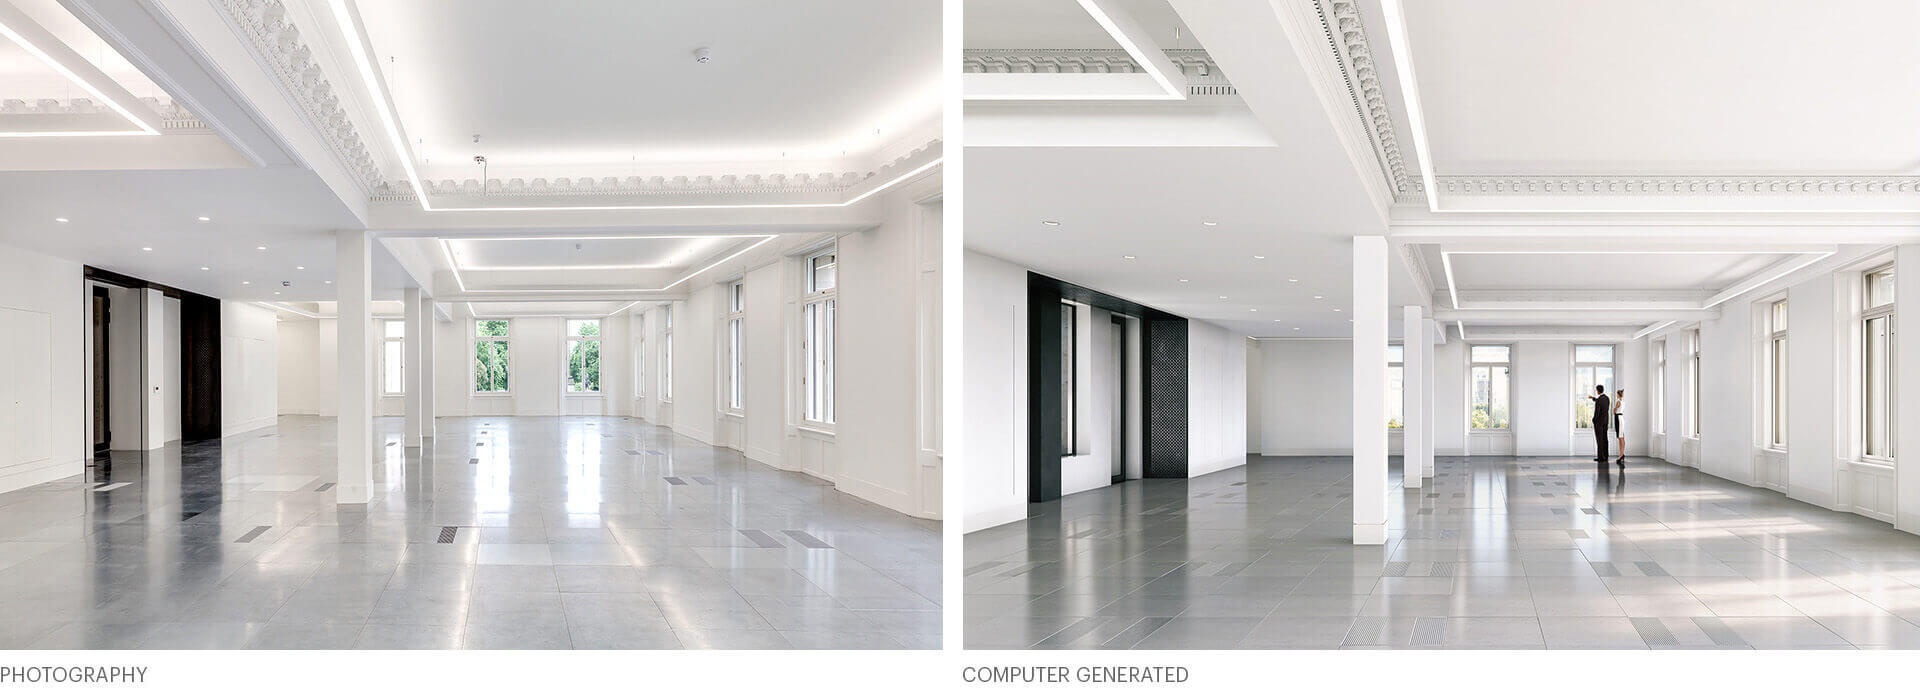 Waterloo Place, before and after architectural visualisation  